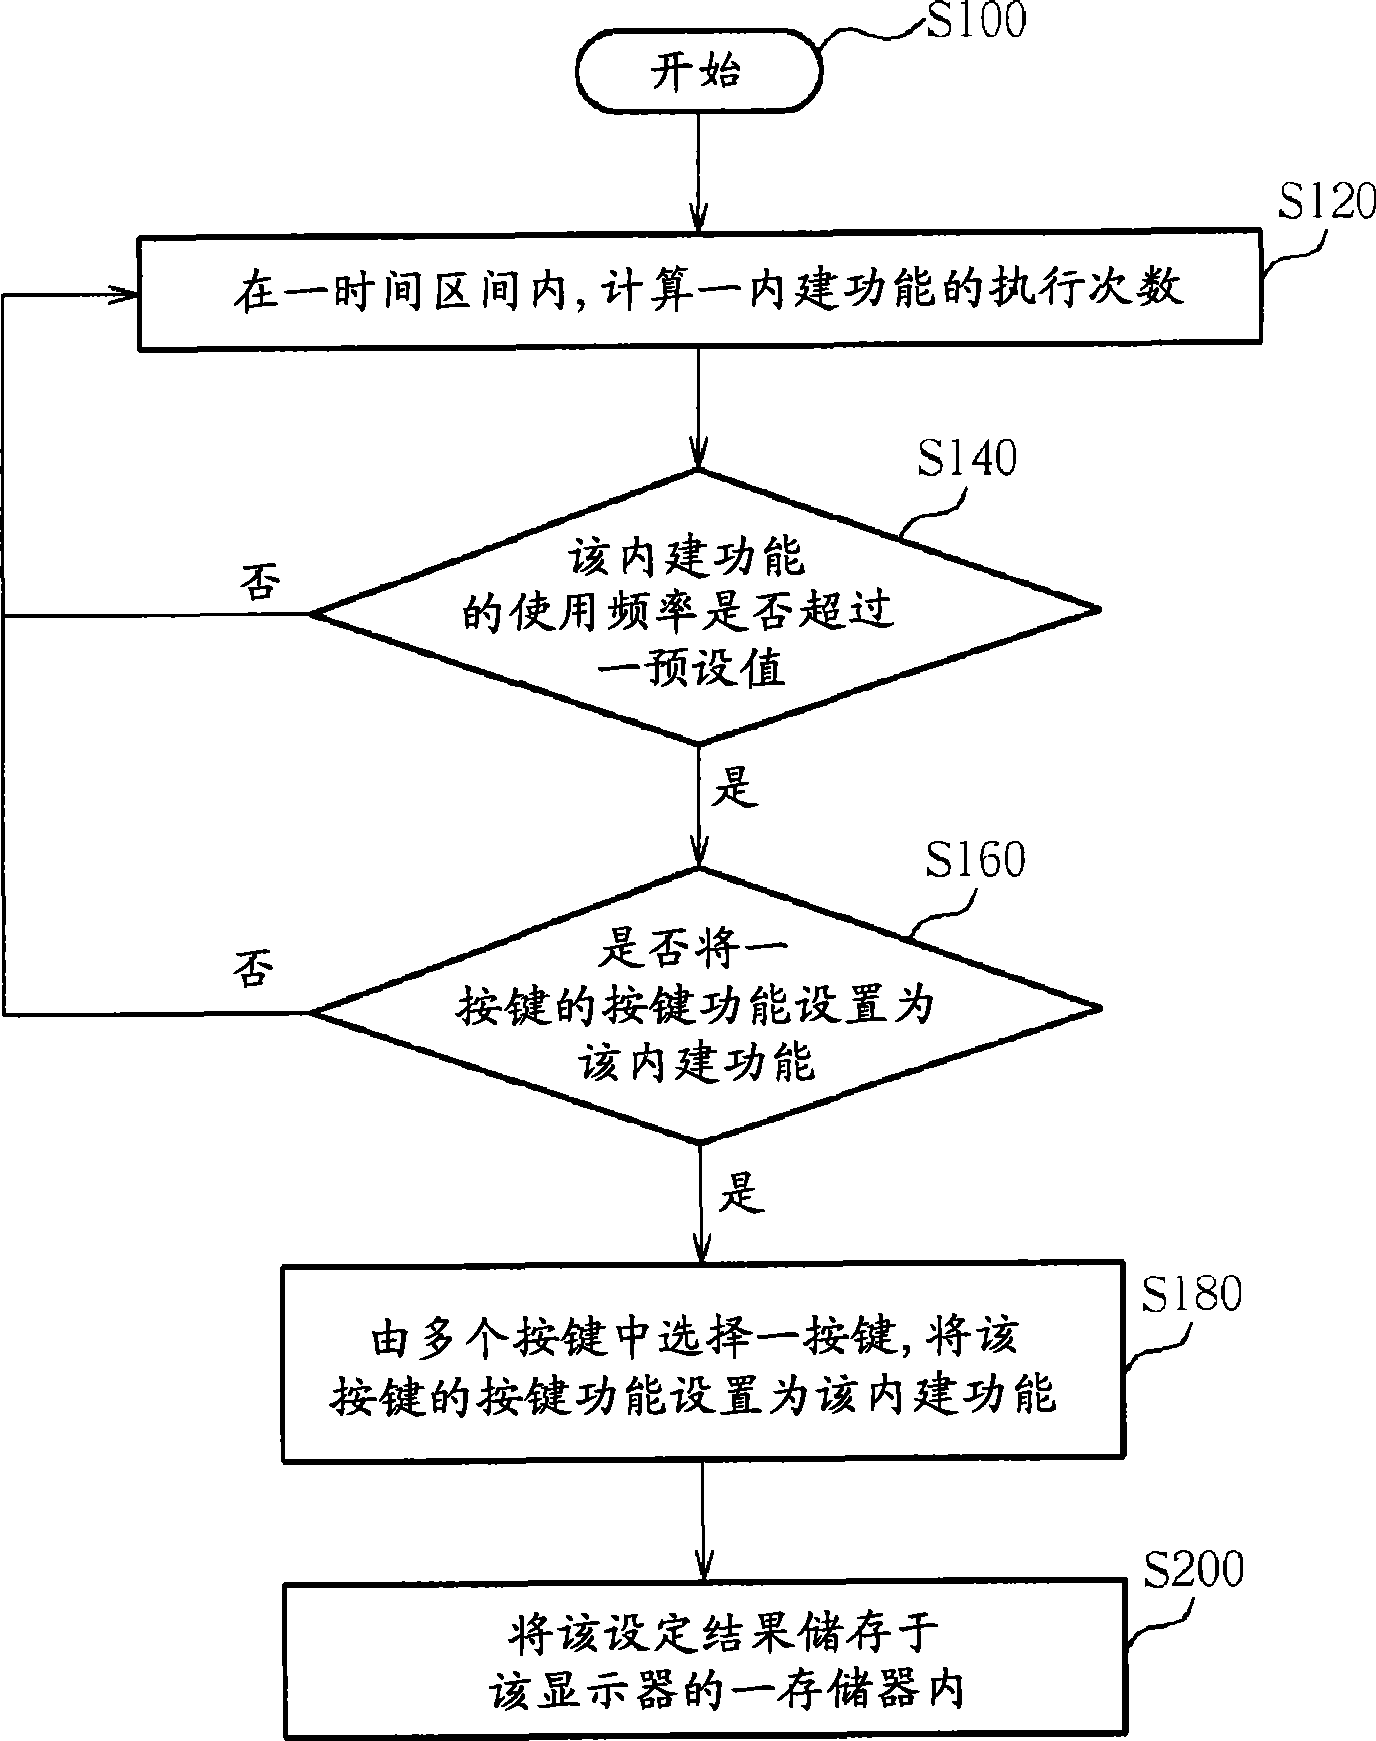 Method for setting push-button function of display and display system